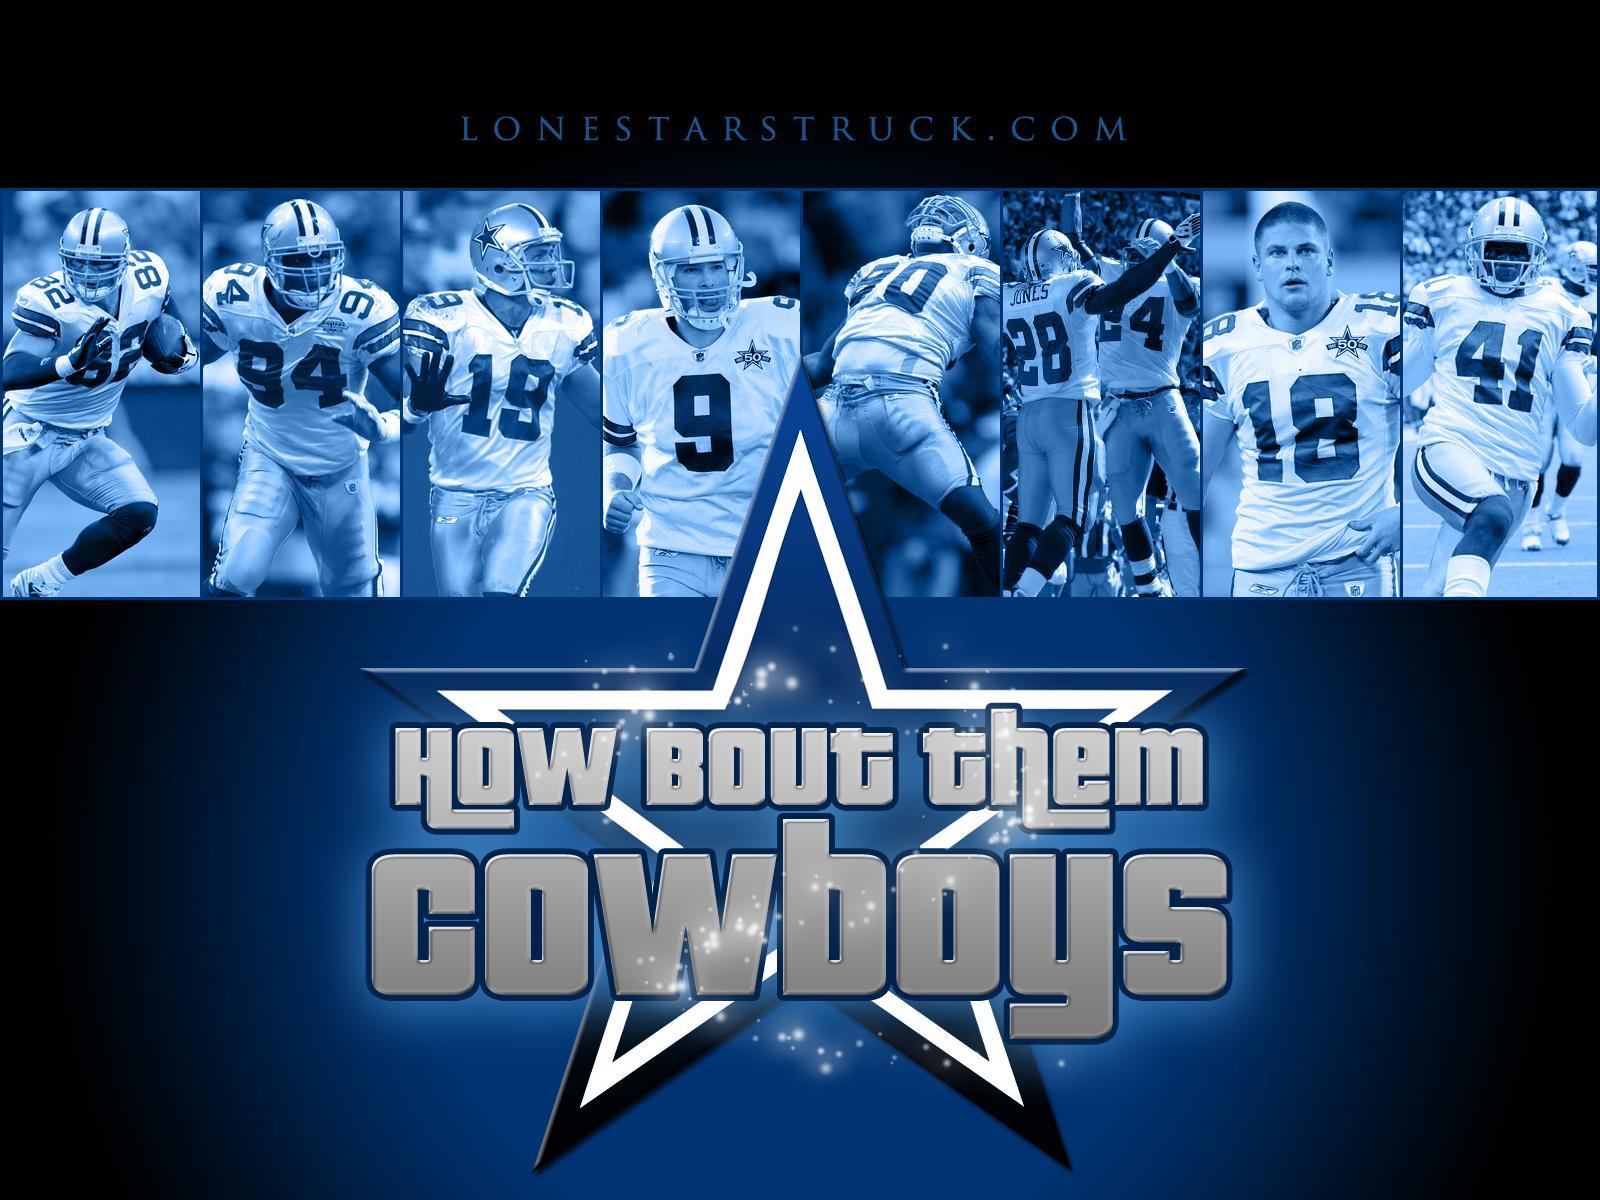 Dallas Cowboys Wallpaper Images amp Pictures   Becuo